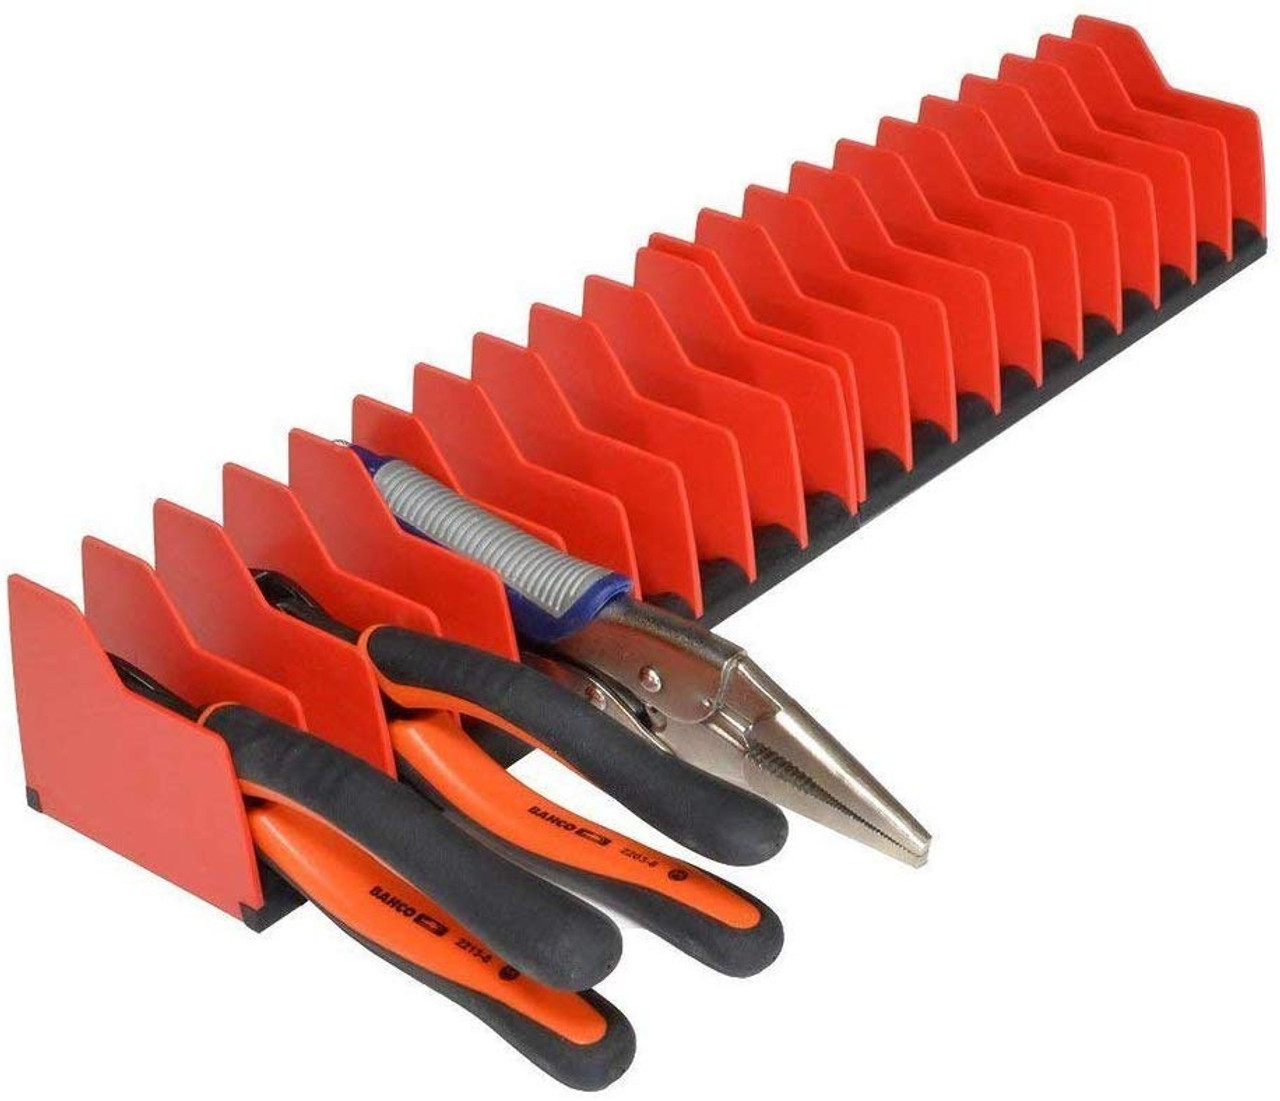 Solid Wood Plier Rack and Holder for 8 Pliers